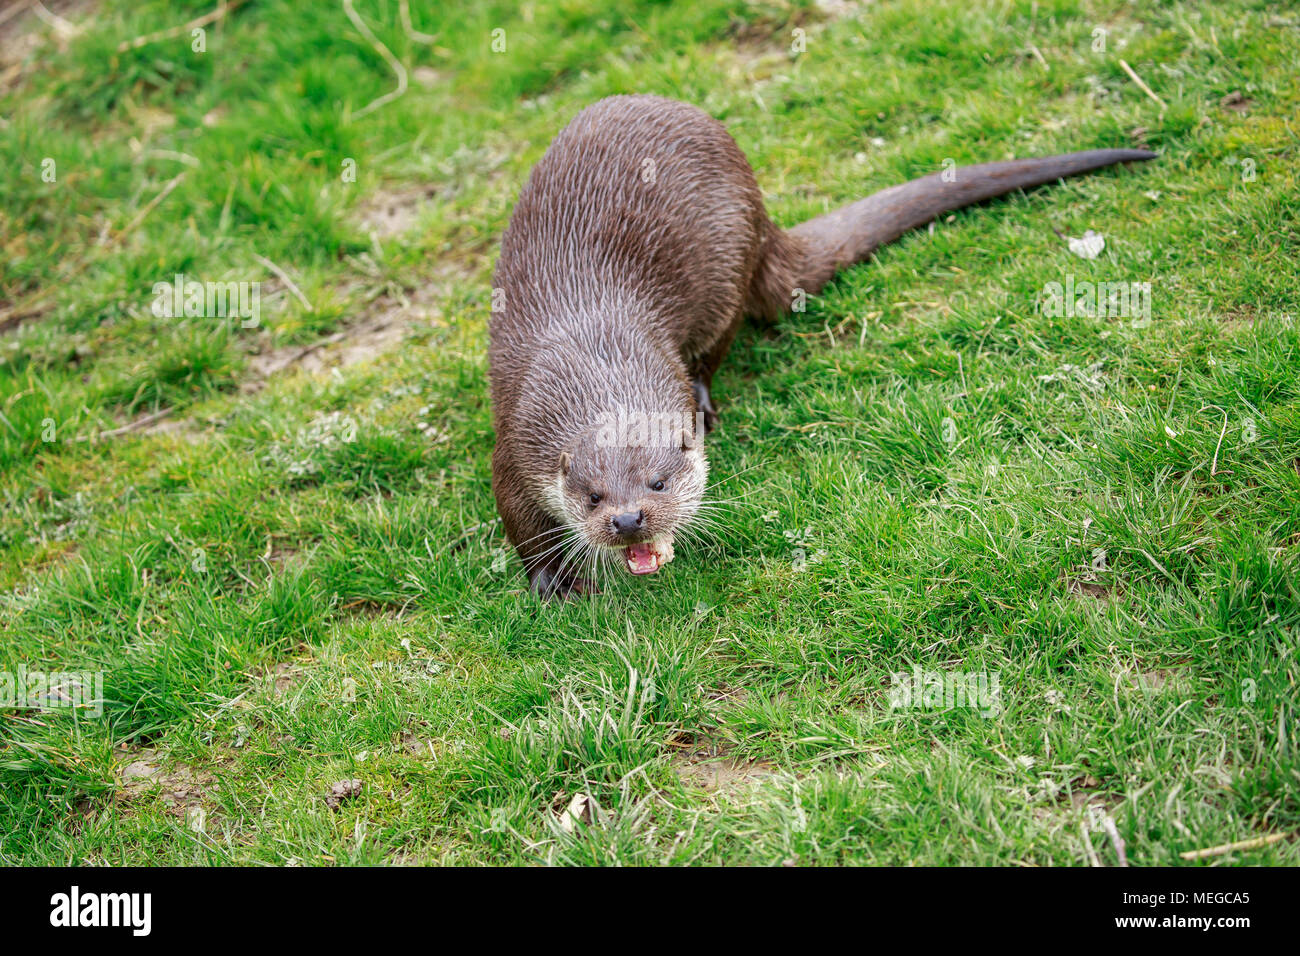 The Eurasian otter, also known as the European otter, Eurasian river otter, common otter, and Old World otter, is a semiaquatic mammal. Stock Photo